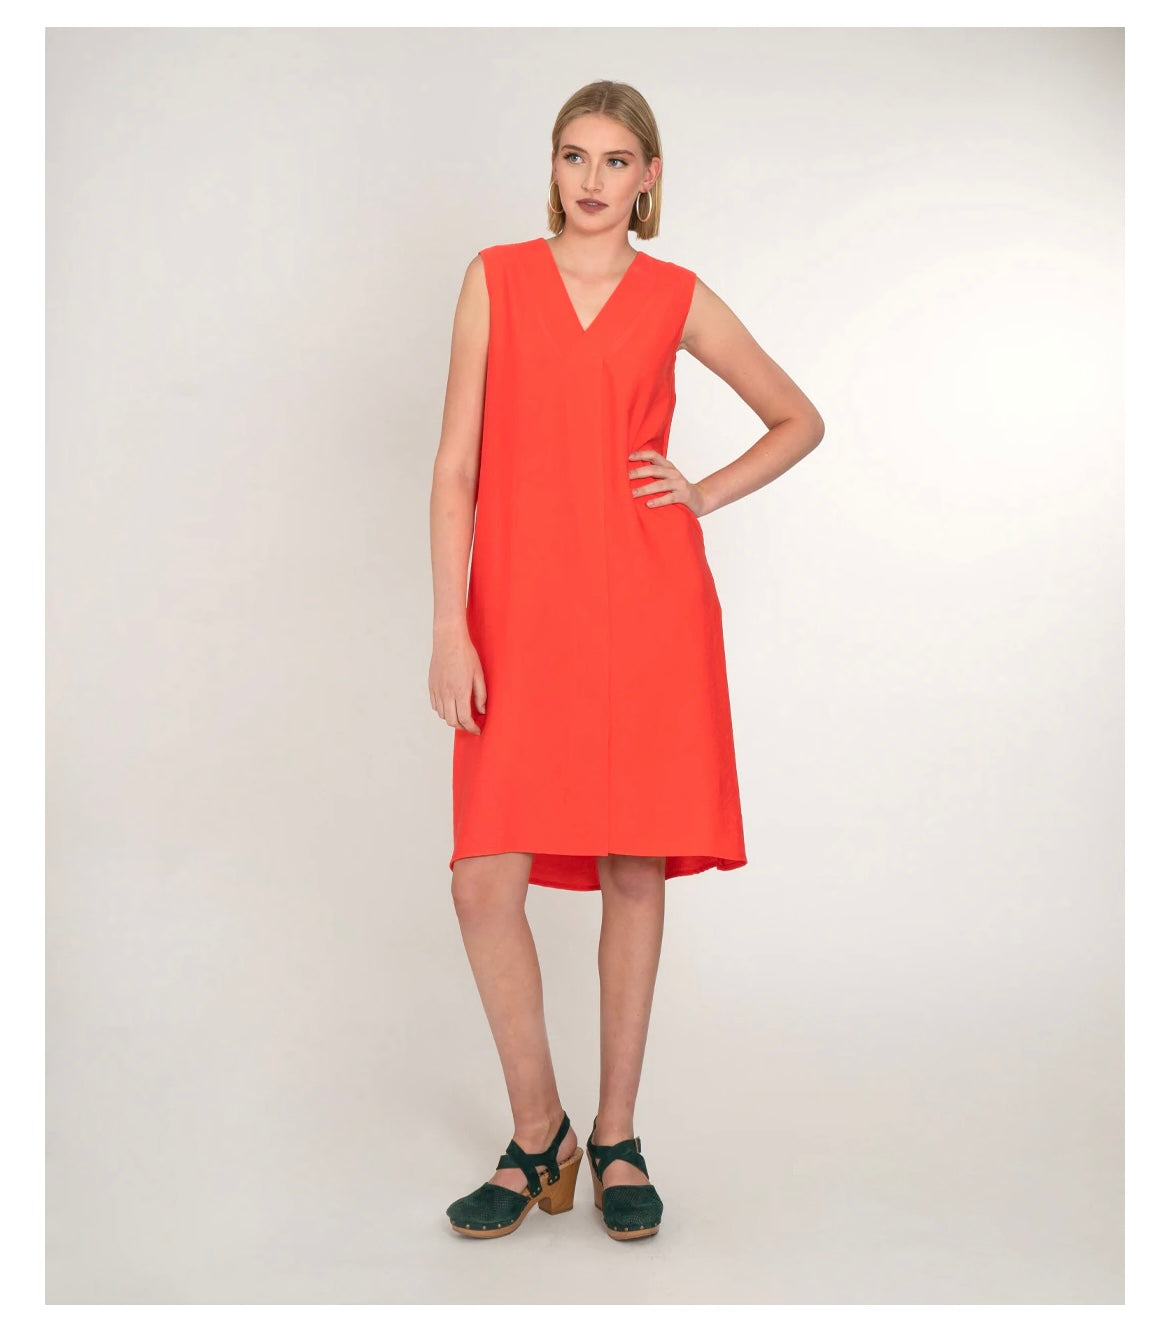 model in a sleeveless vneck coral dress, in front of a white background